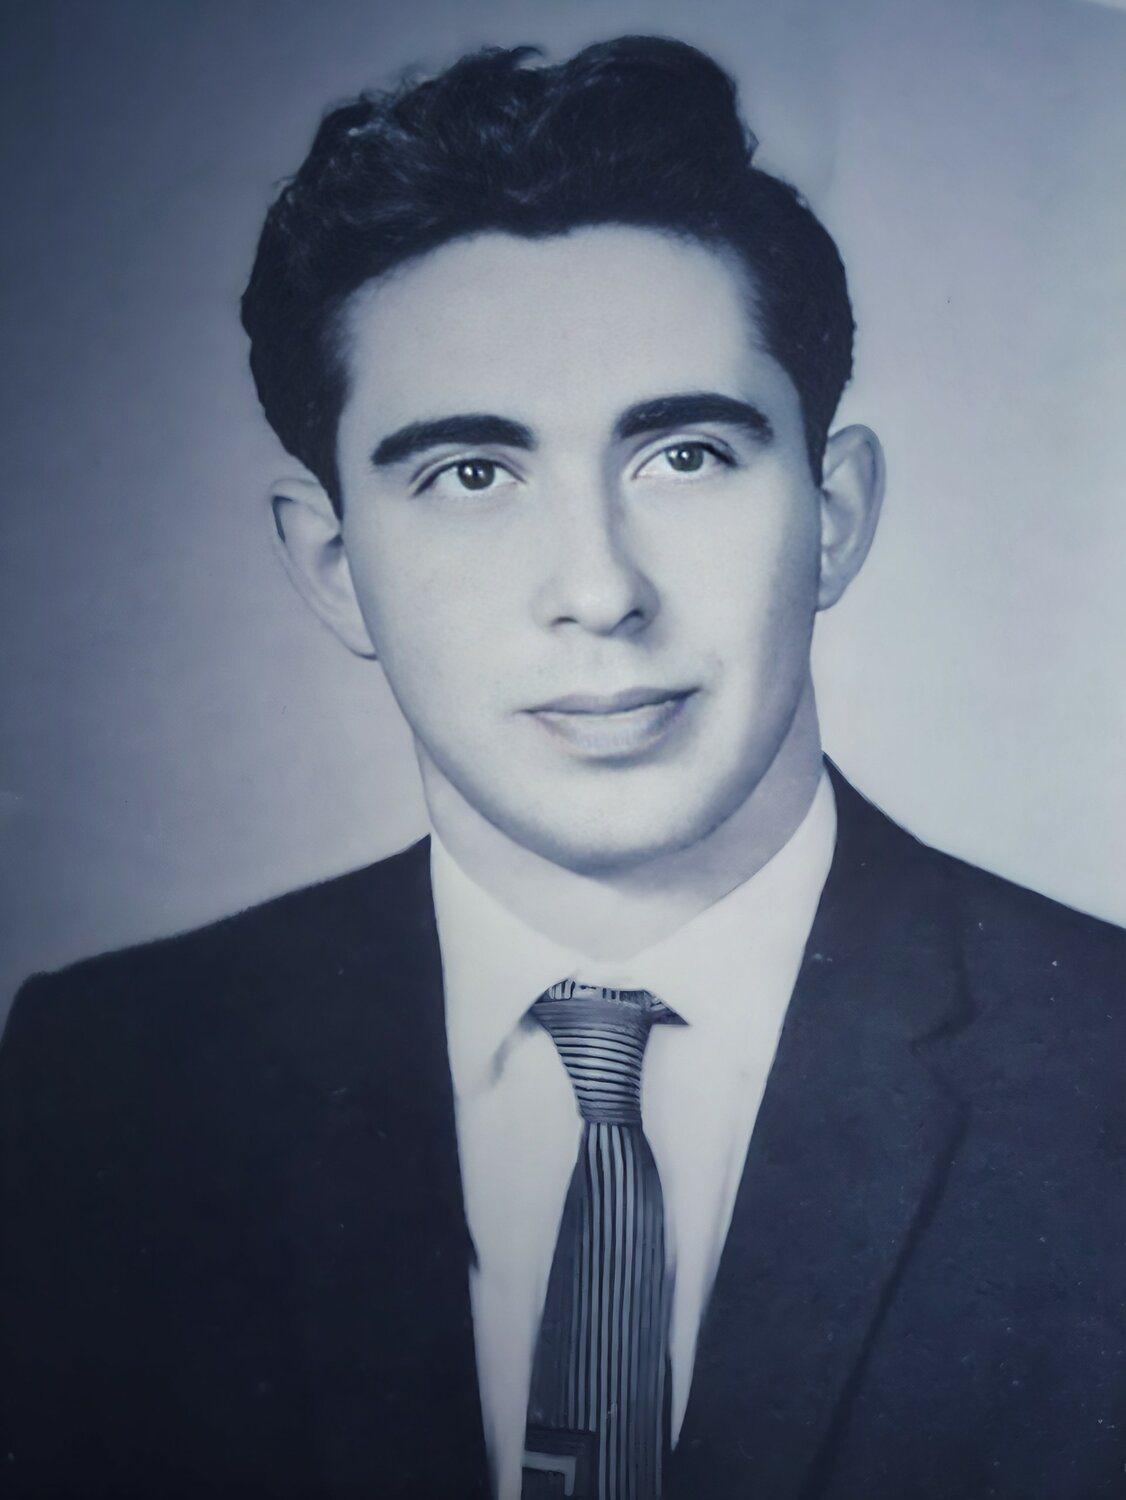 A young Leo Contente in 1959 when he graduated from Colt Memorial High School.